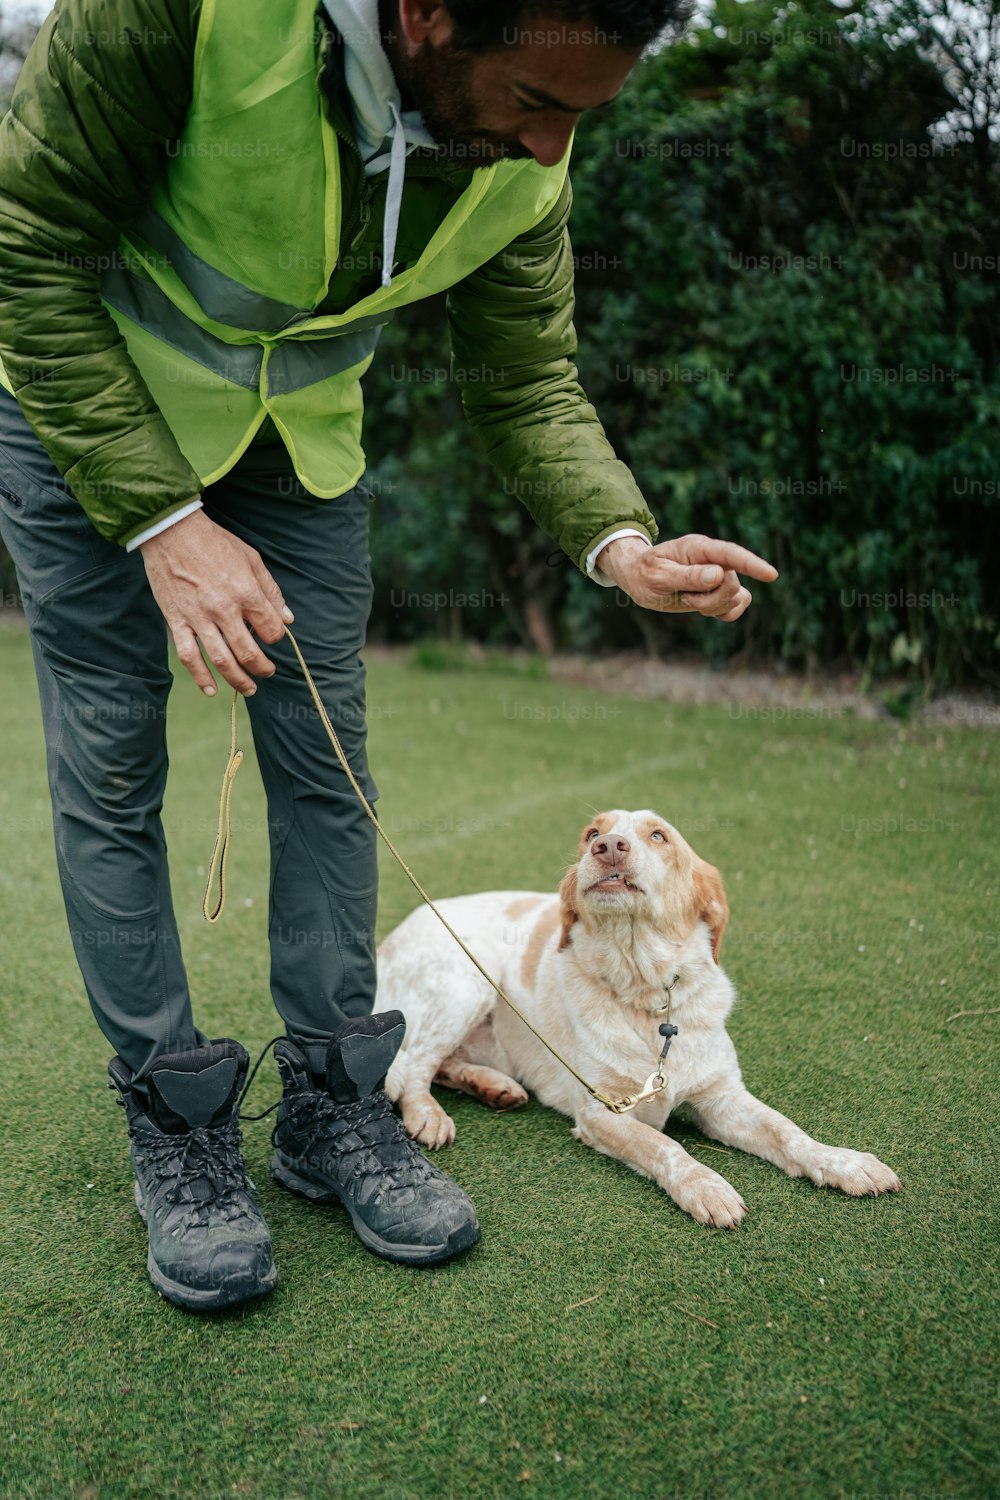 a man in a green jacket petting a brown and white dog